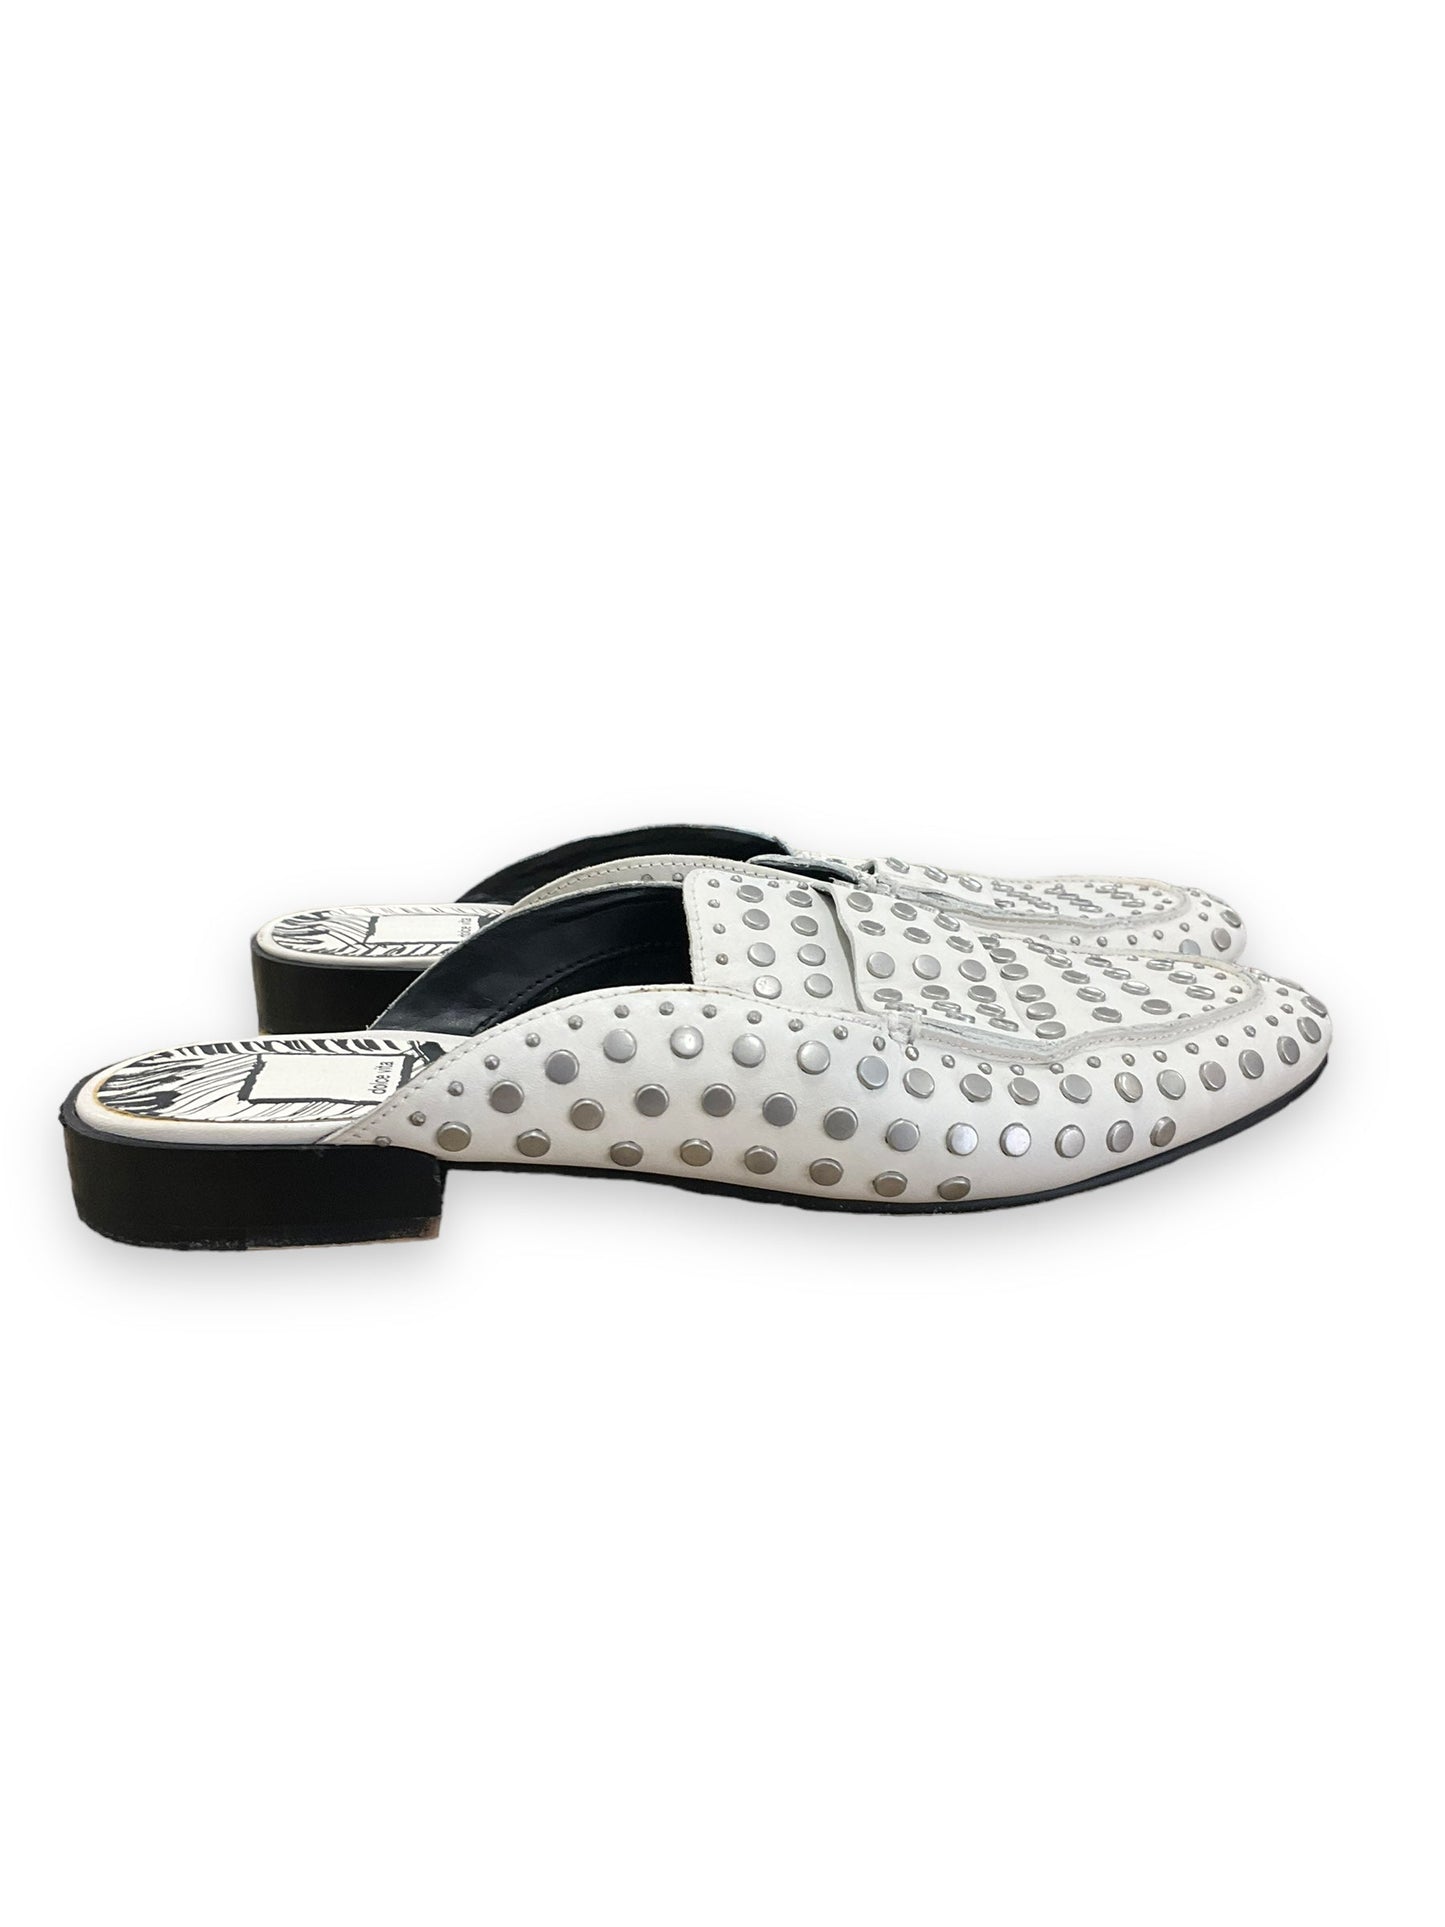 Shoes Flats By Dolce Vita  Size: 7.5